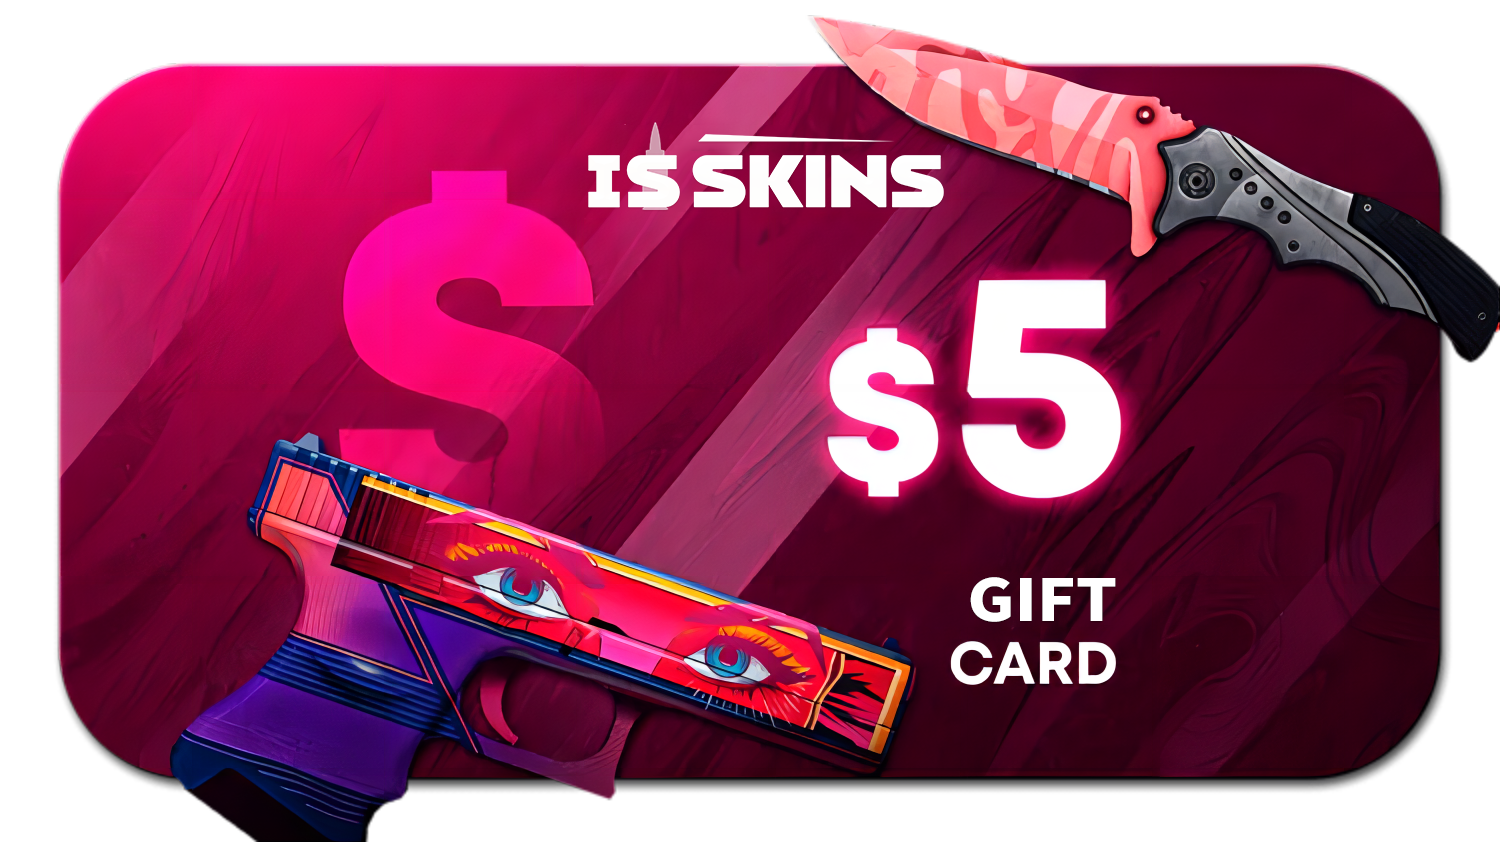 ISSKINS $5 Gift Card 5.29 usd